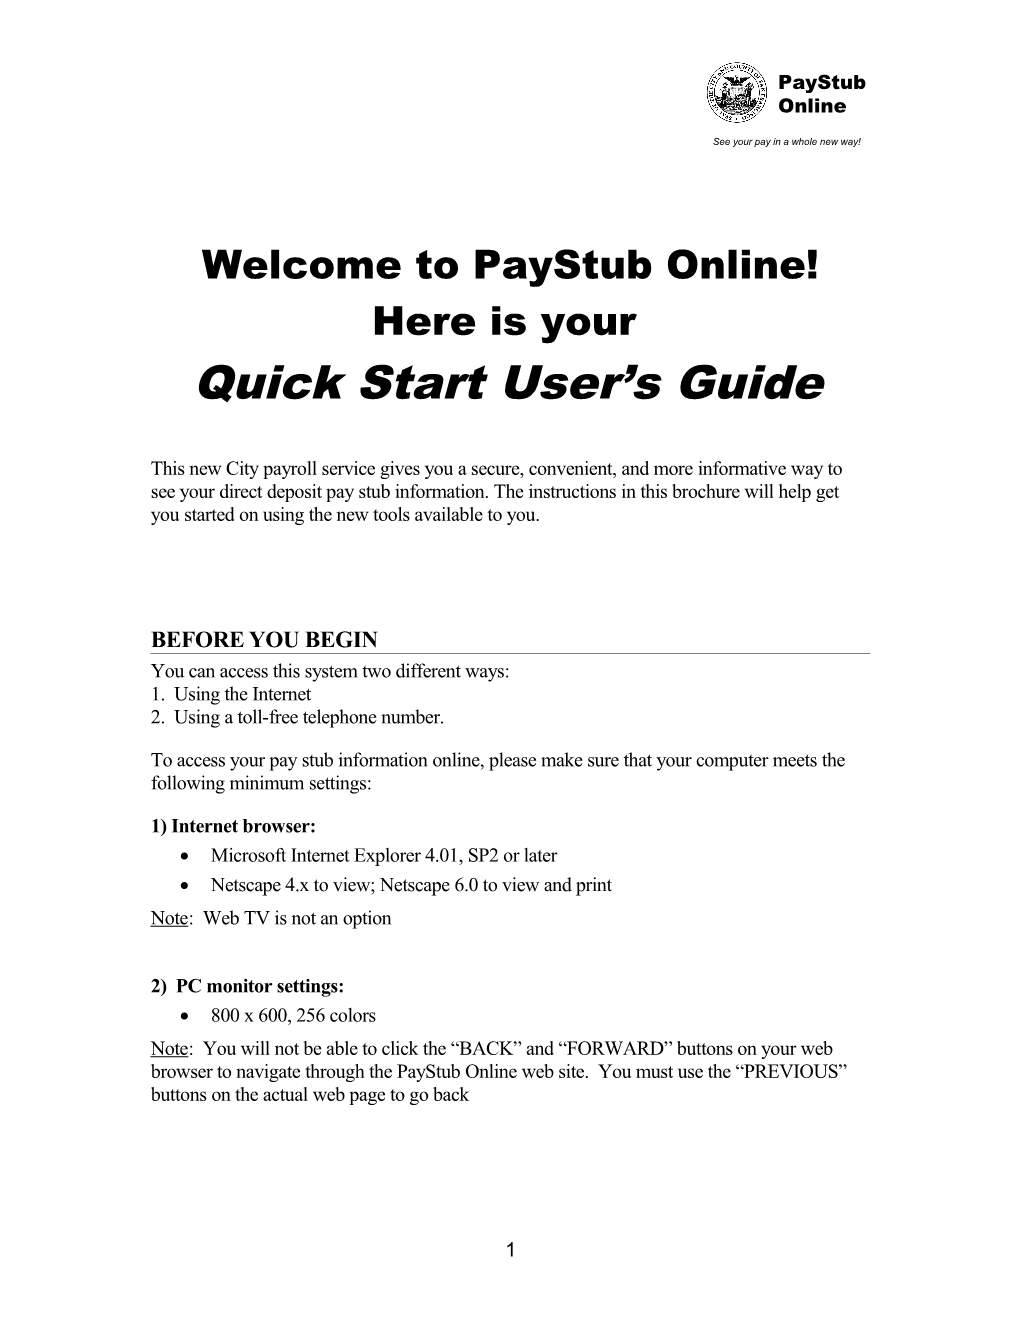 Welcome to Paystub Online! Here Is Your Quick Start User S Guide